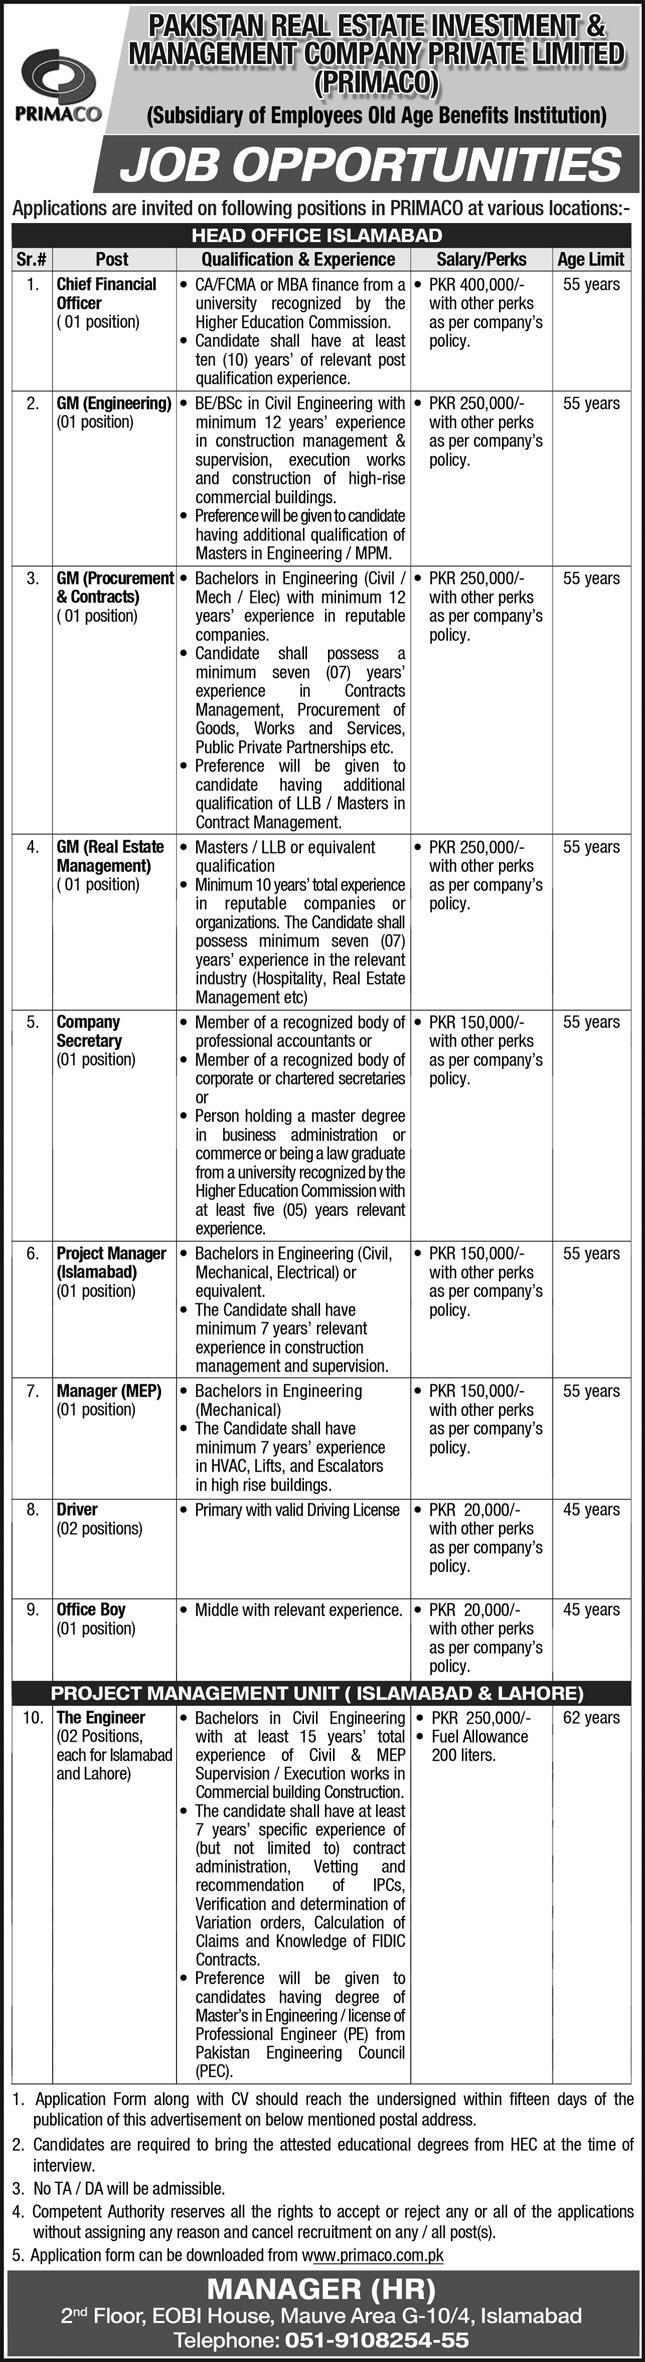 PAKISTAN REAL ESTATE INVESTMENT & MANAGEMENT COMPANY PRIVATE LIMITED JOBS 2021